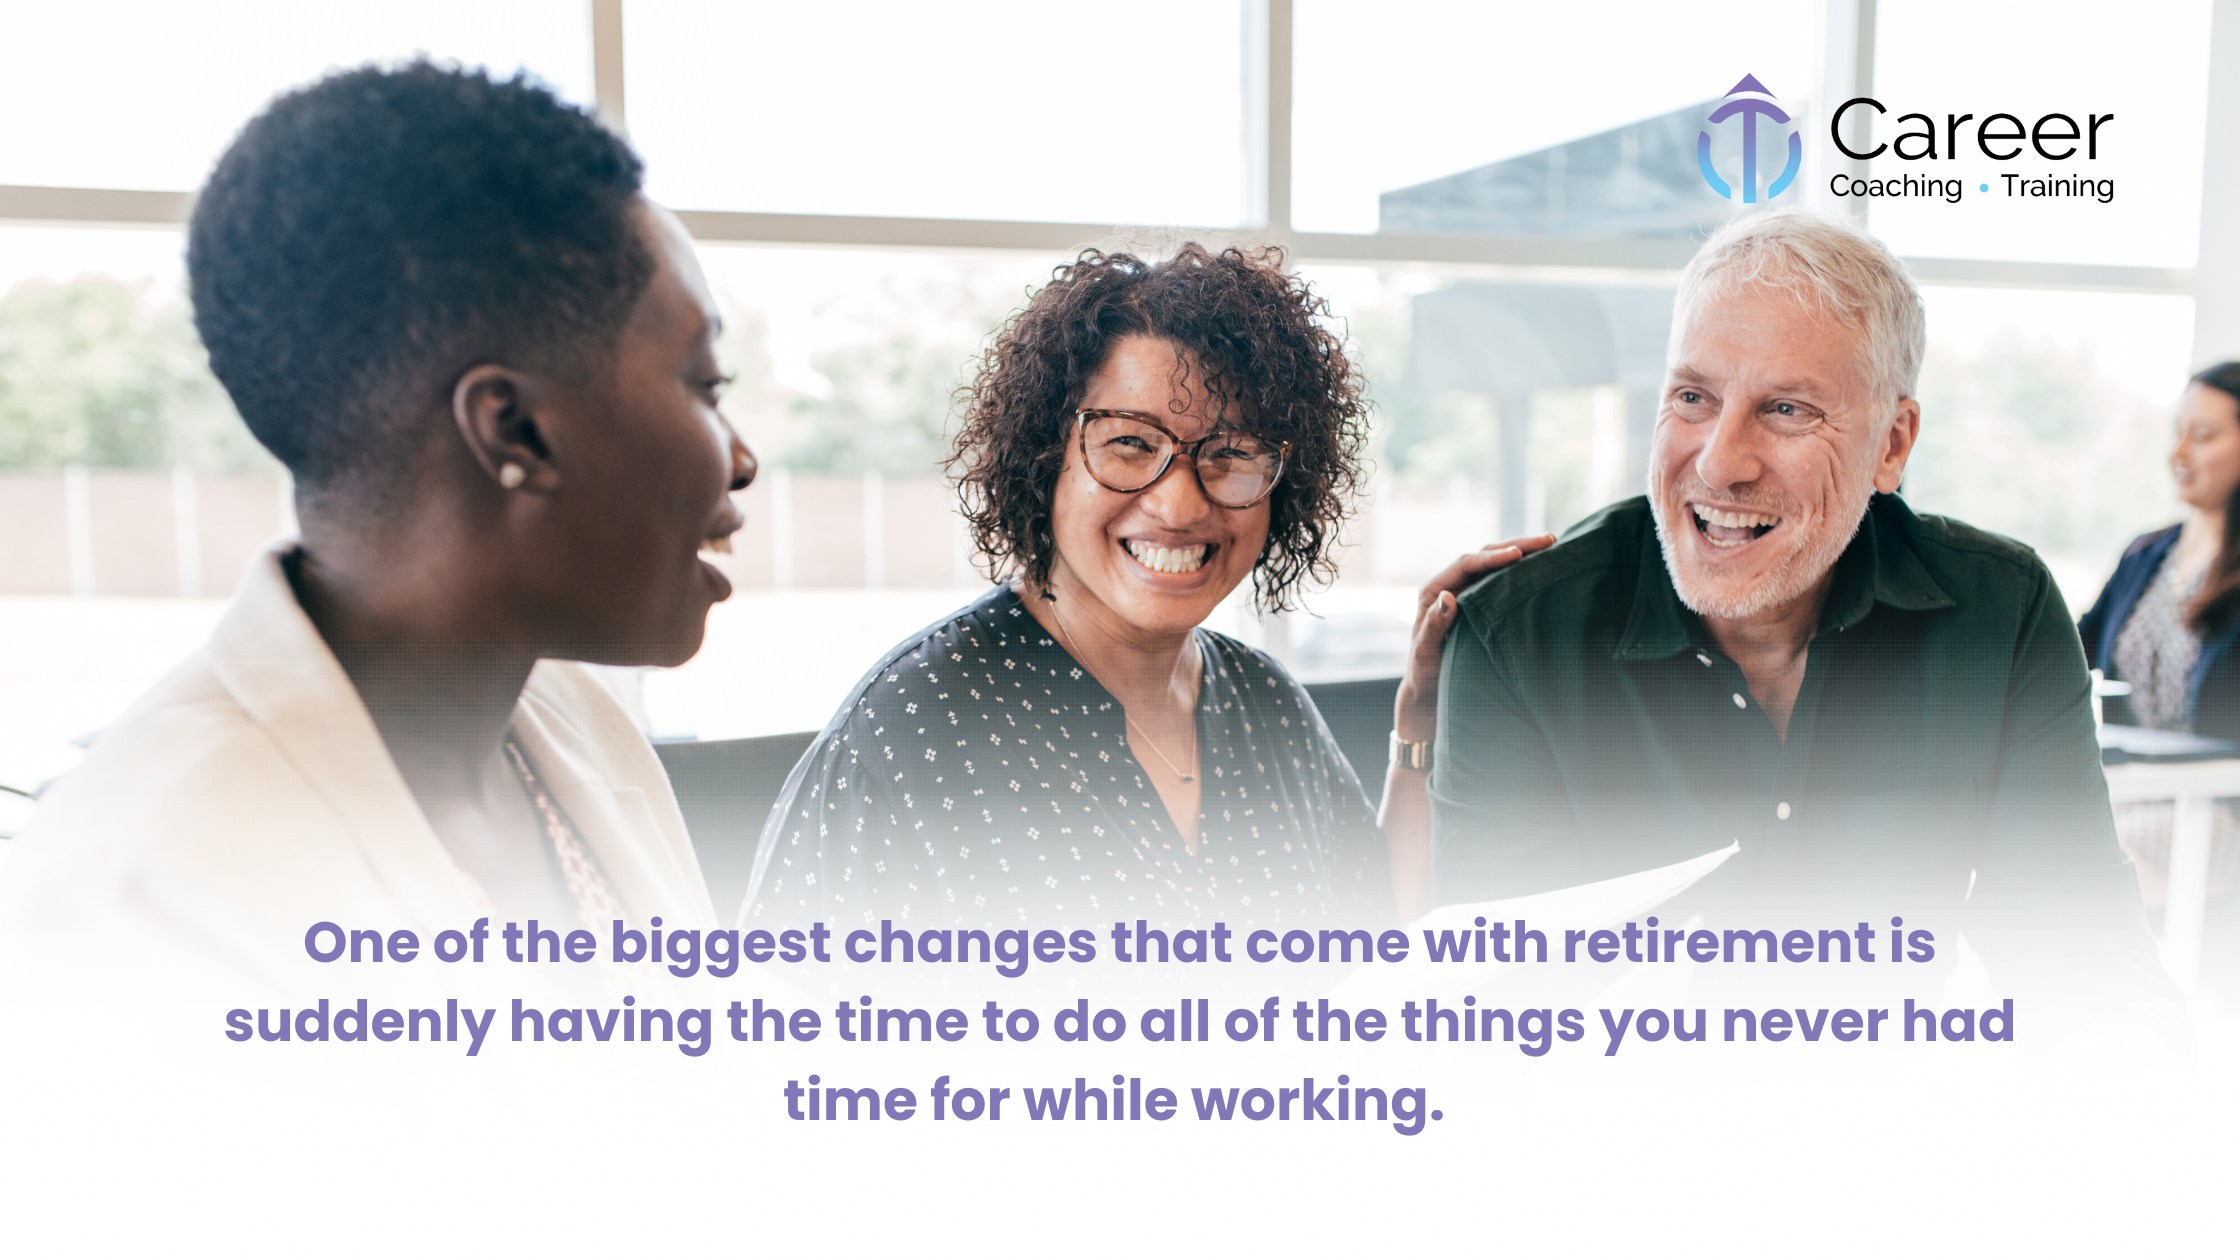 One of the biggest changes that come with retirement is suddenly having the time to do all of the things you never had time for while working.